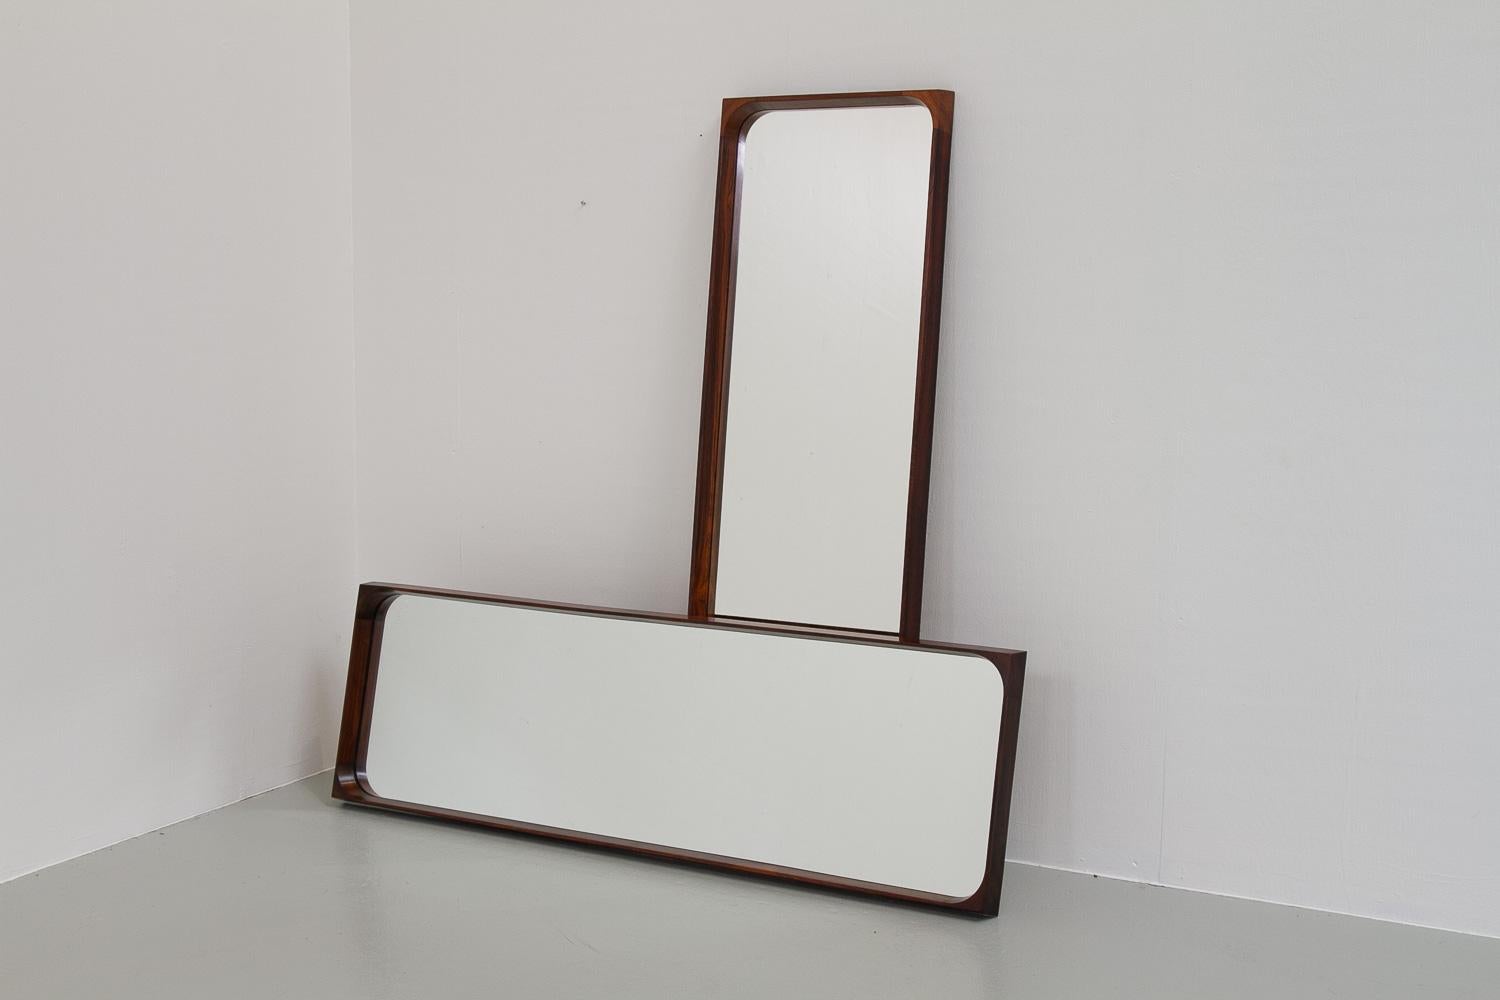 Danish Modern Rosewood Mirrors by Niels Clausen for NC Møbler, 1960s. Set of 2. For Sale 12